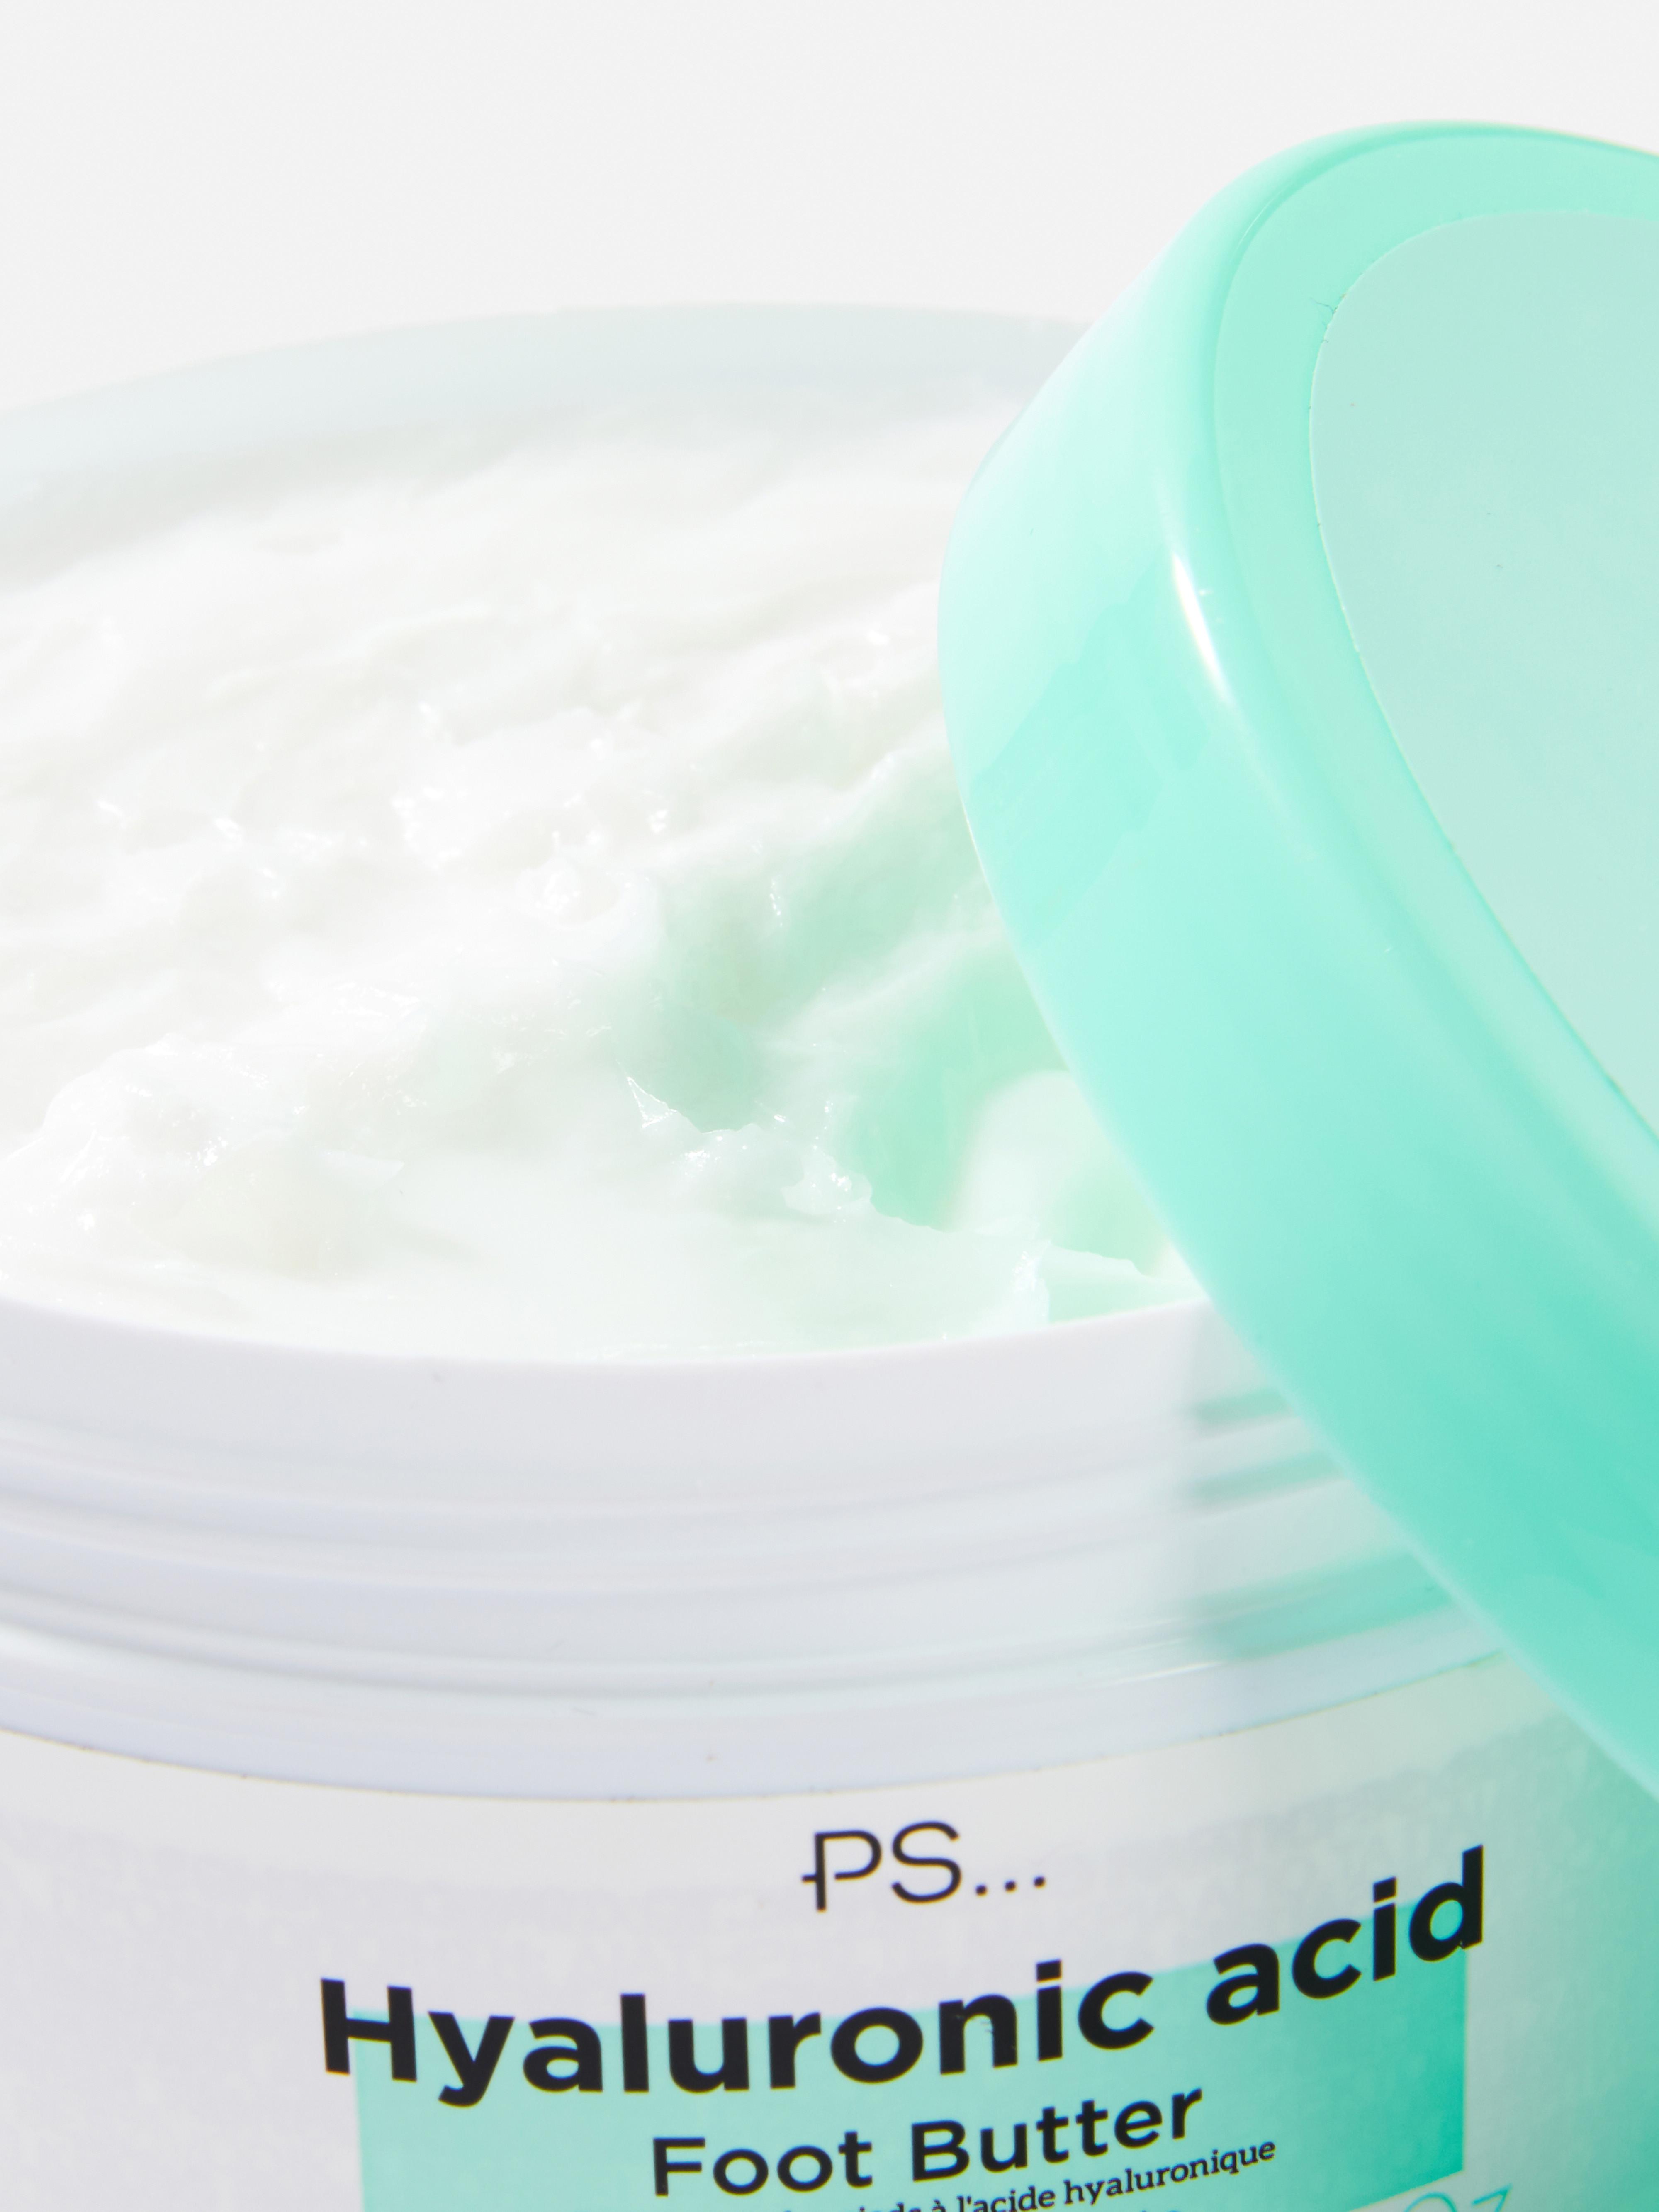 PS Hyaluronic Acid Foot Butter